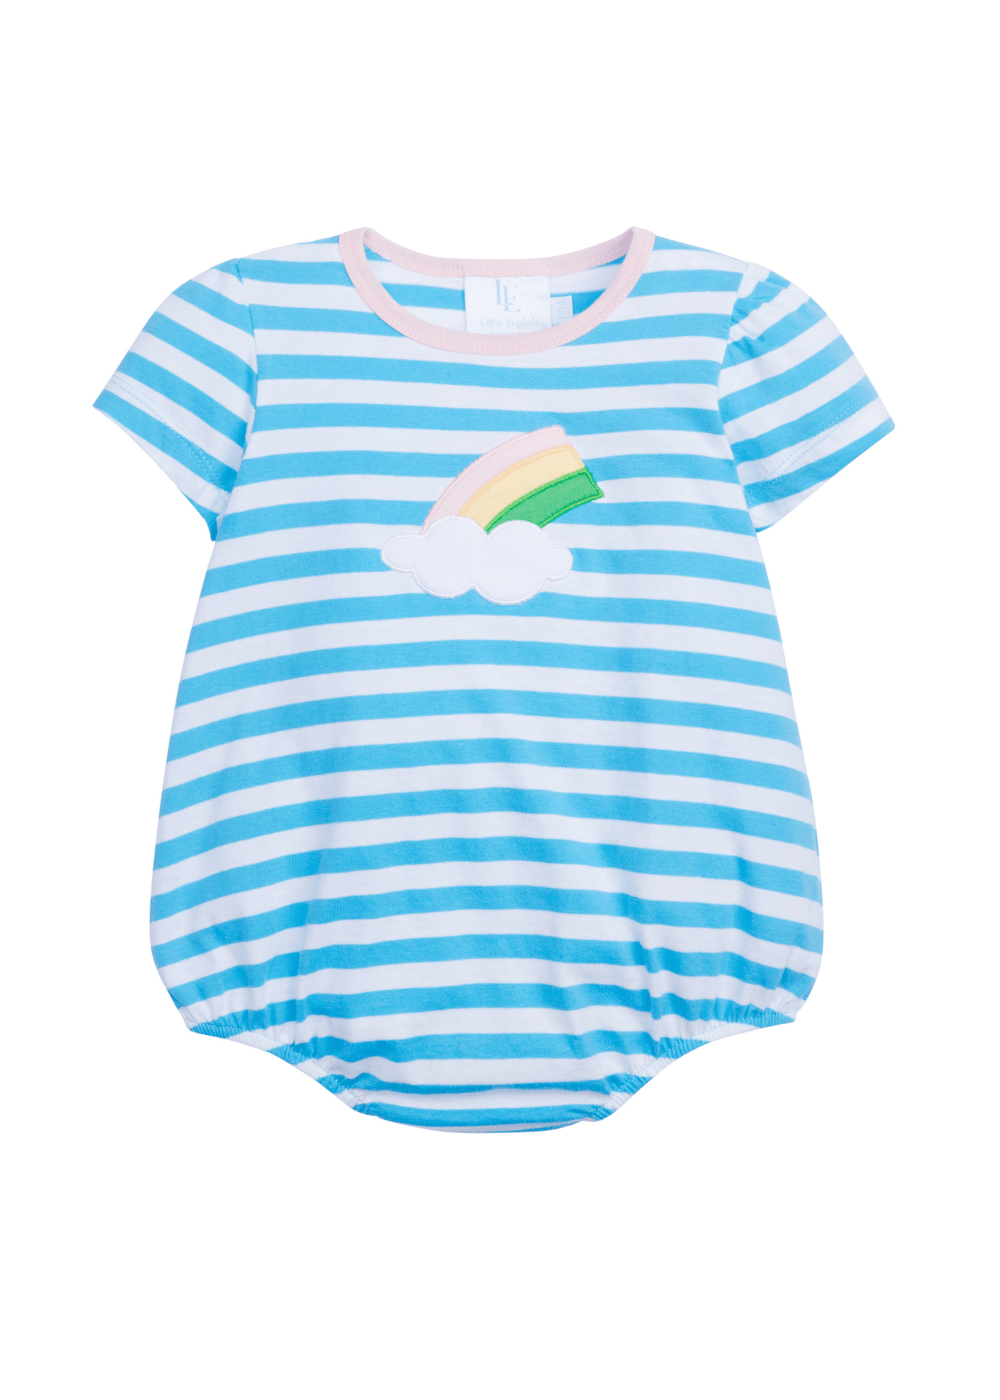 seguridadindustrialcr baby girl's aqua and white striped bubble with rainbow applique